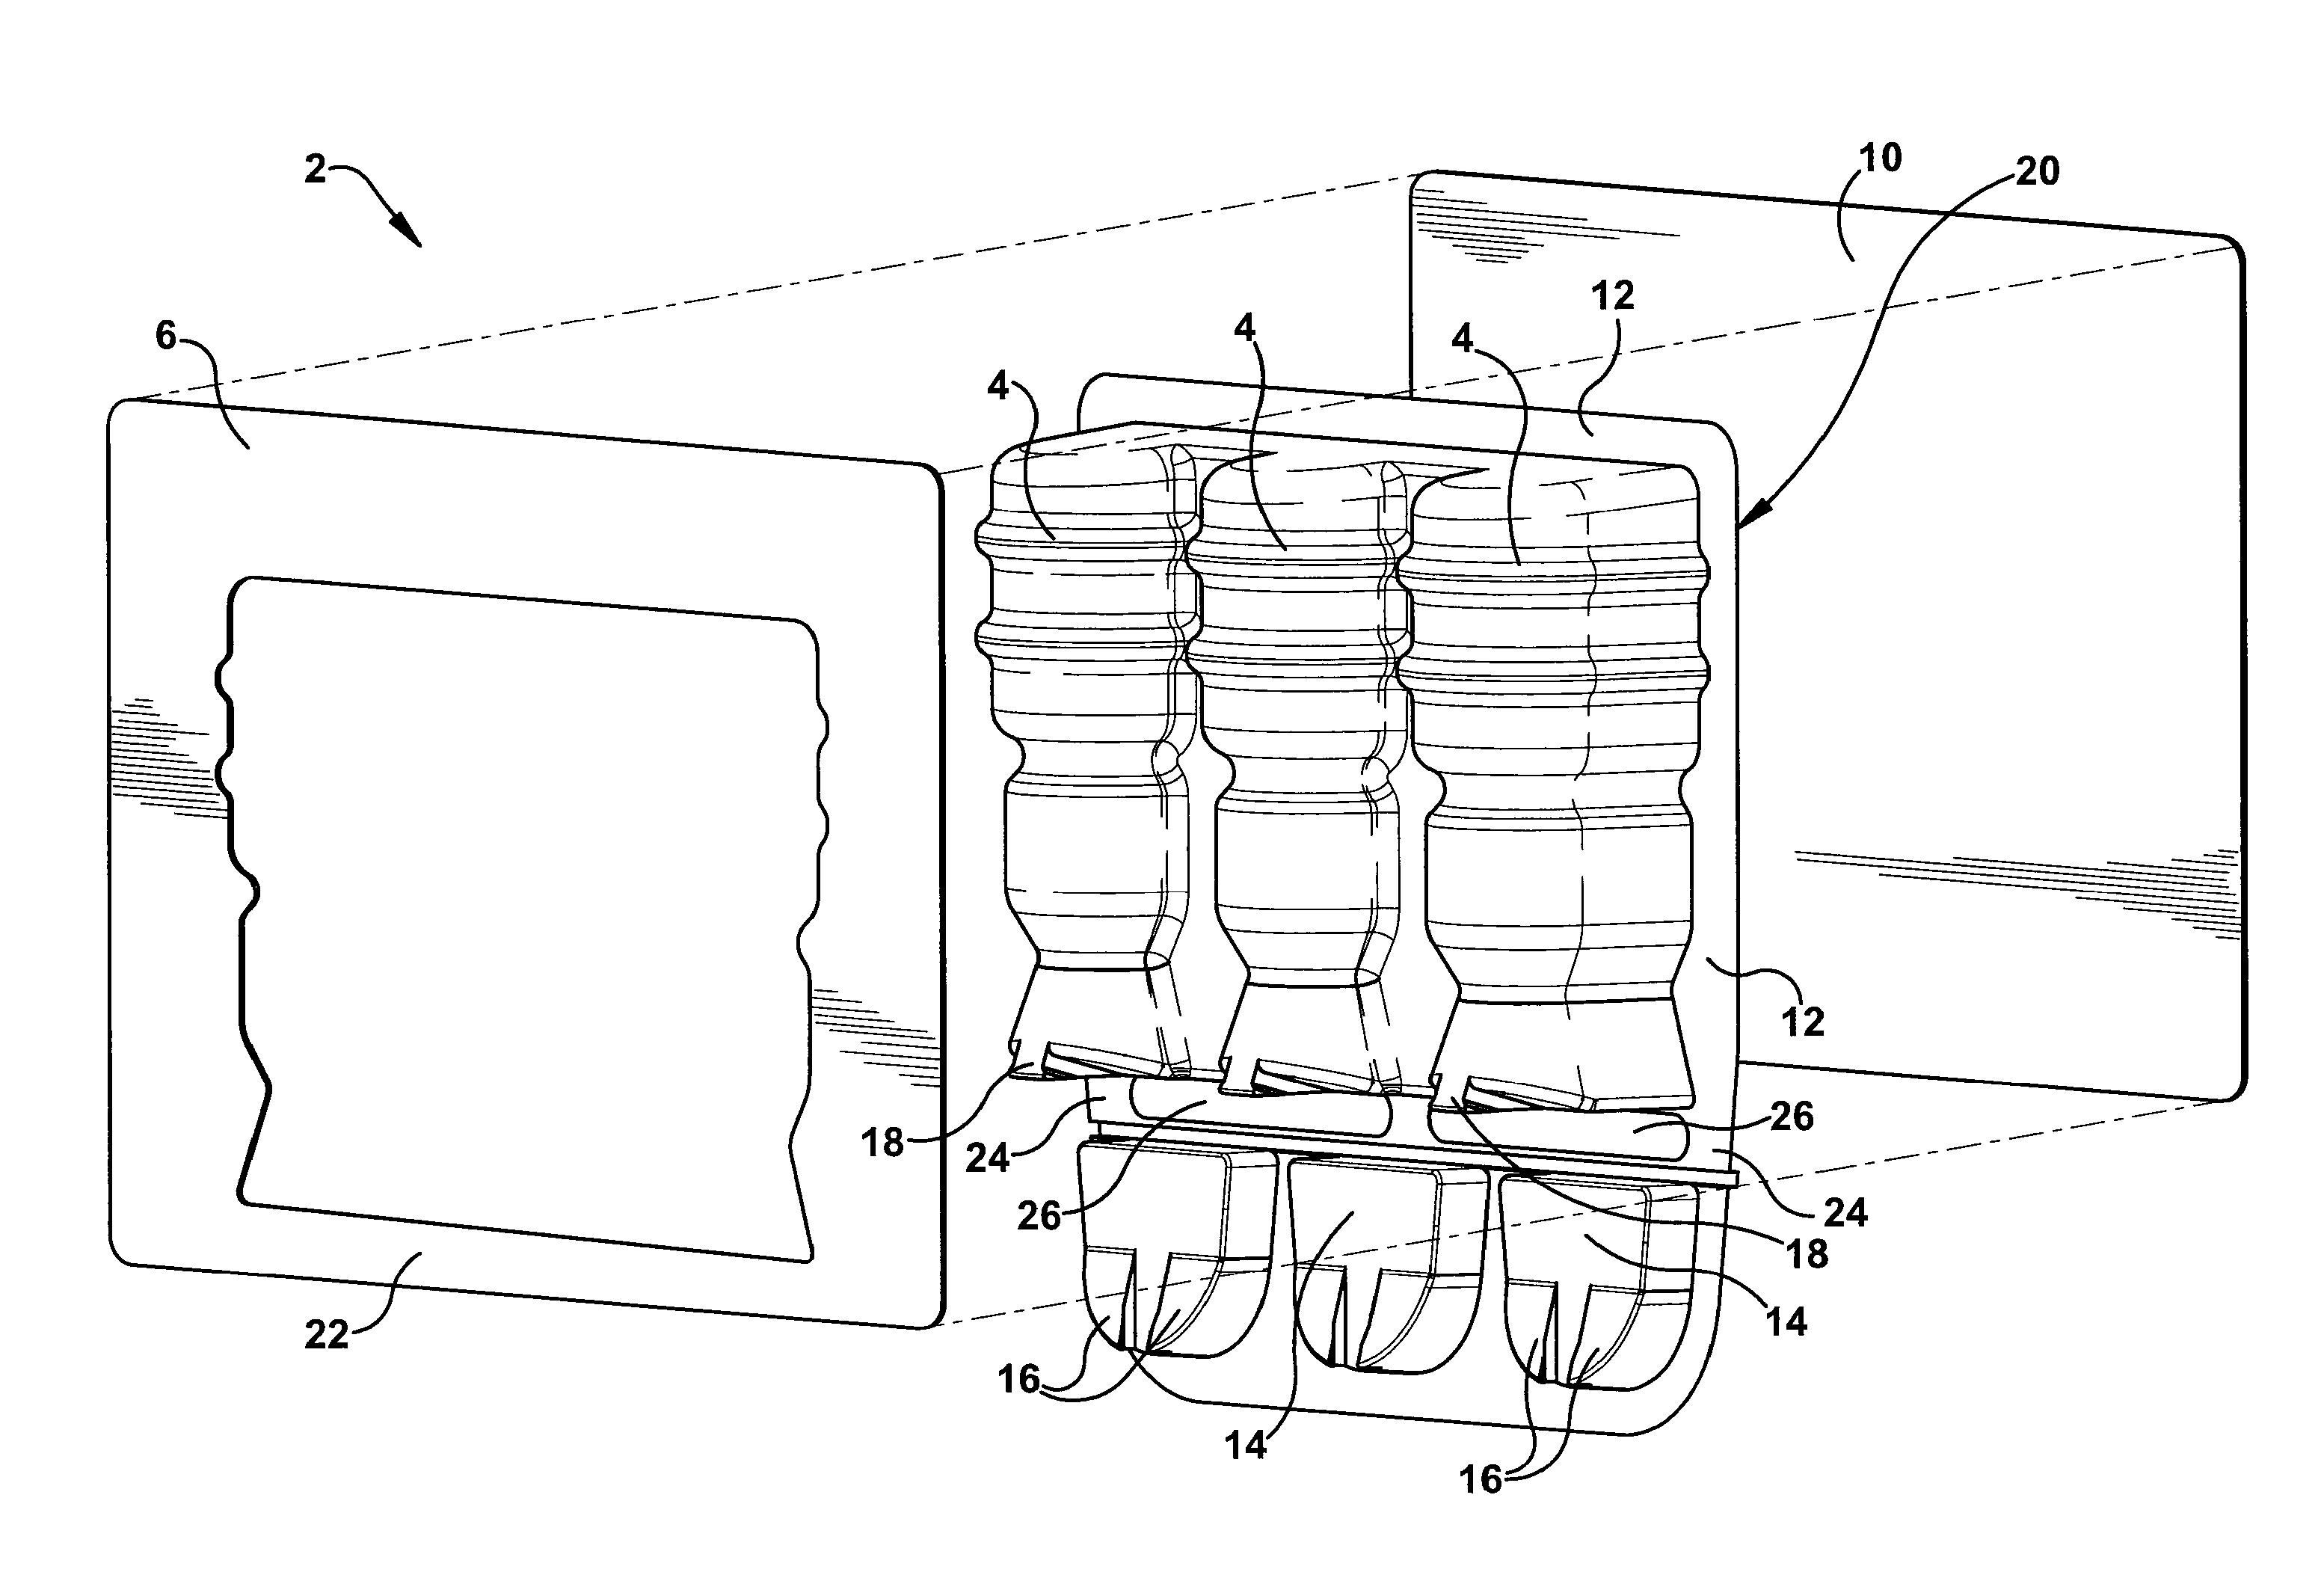 Environmentally separable packaging device with attaching base